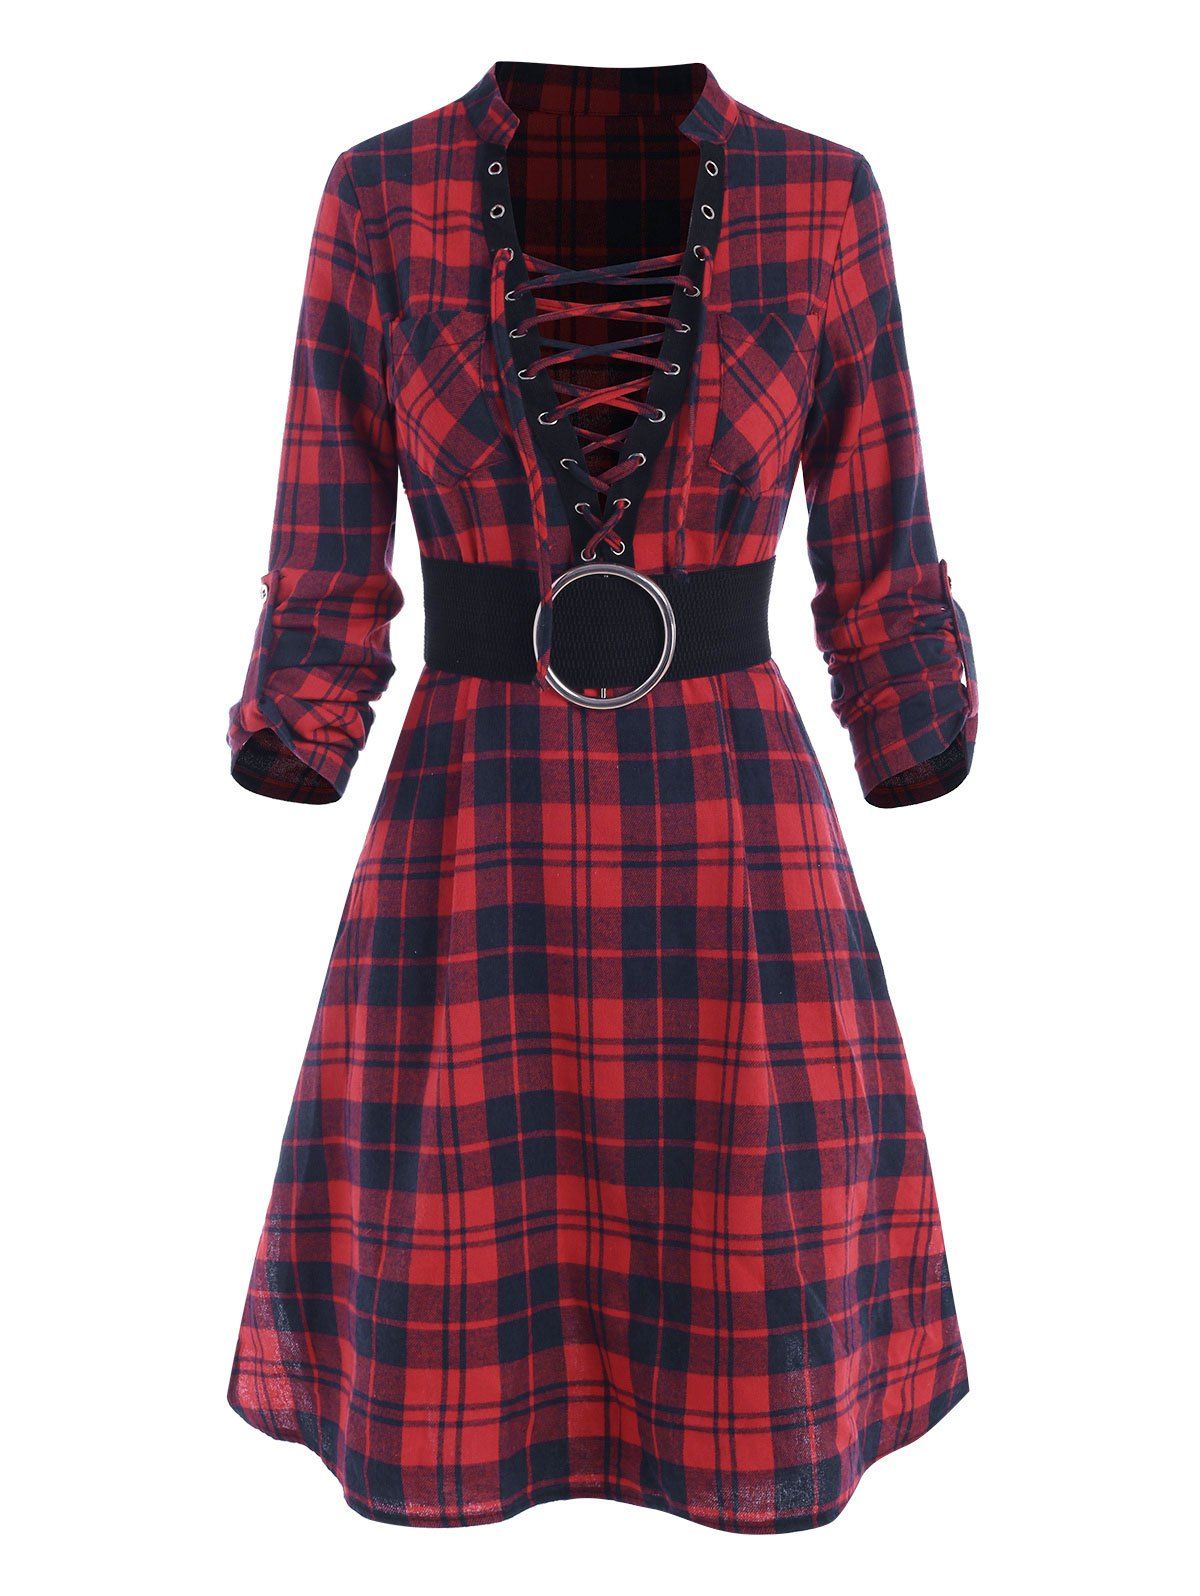 Vintage Plaid Checked Lace Up O Ring Belted Roll Up Sleeve Shirt Dress - RED S